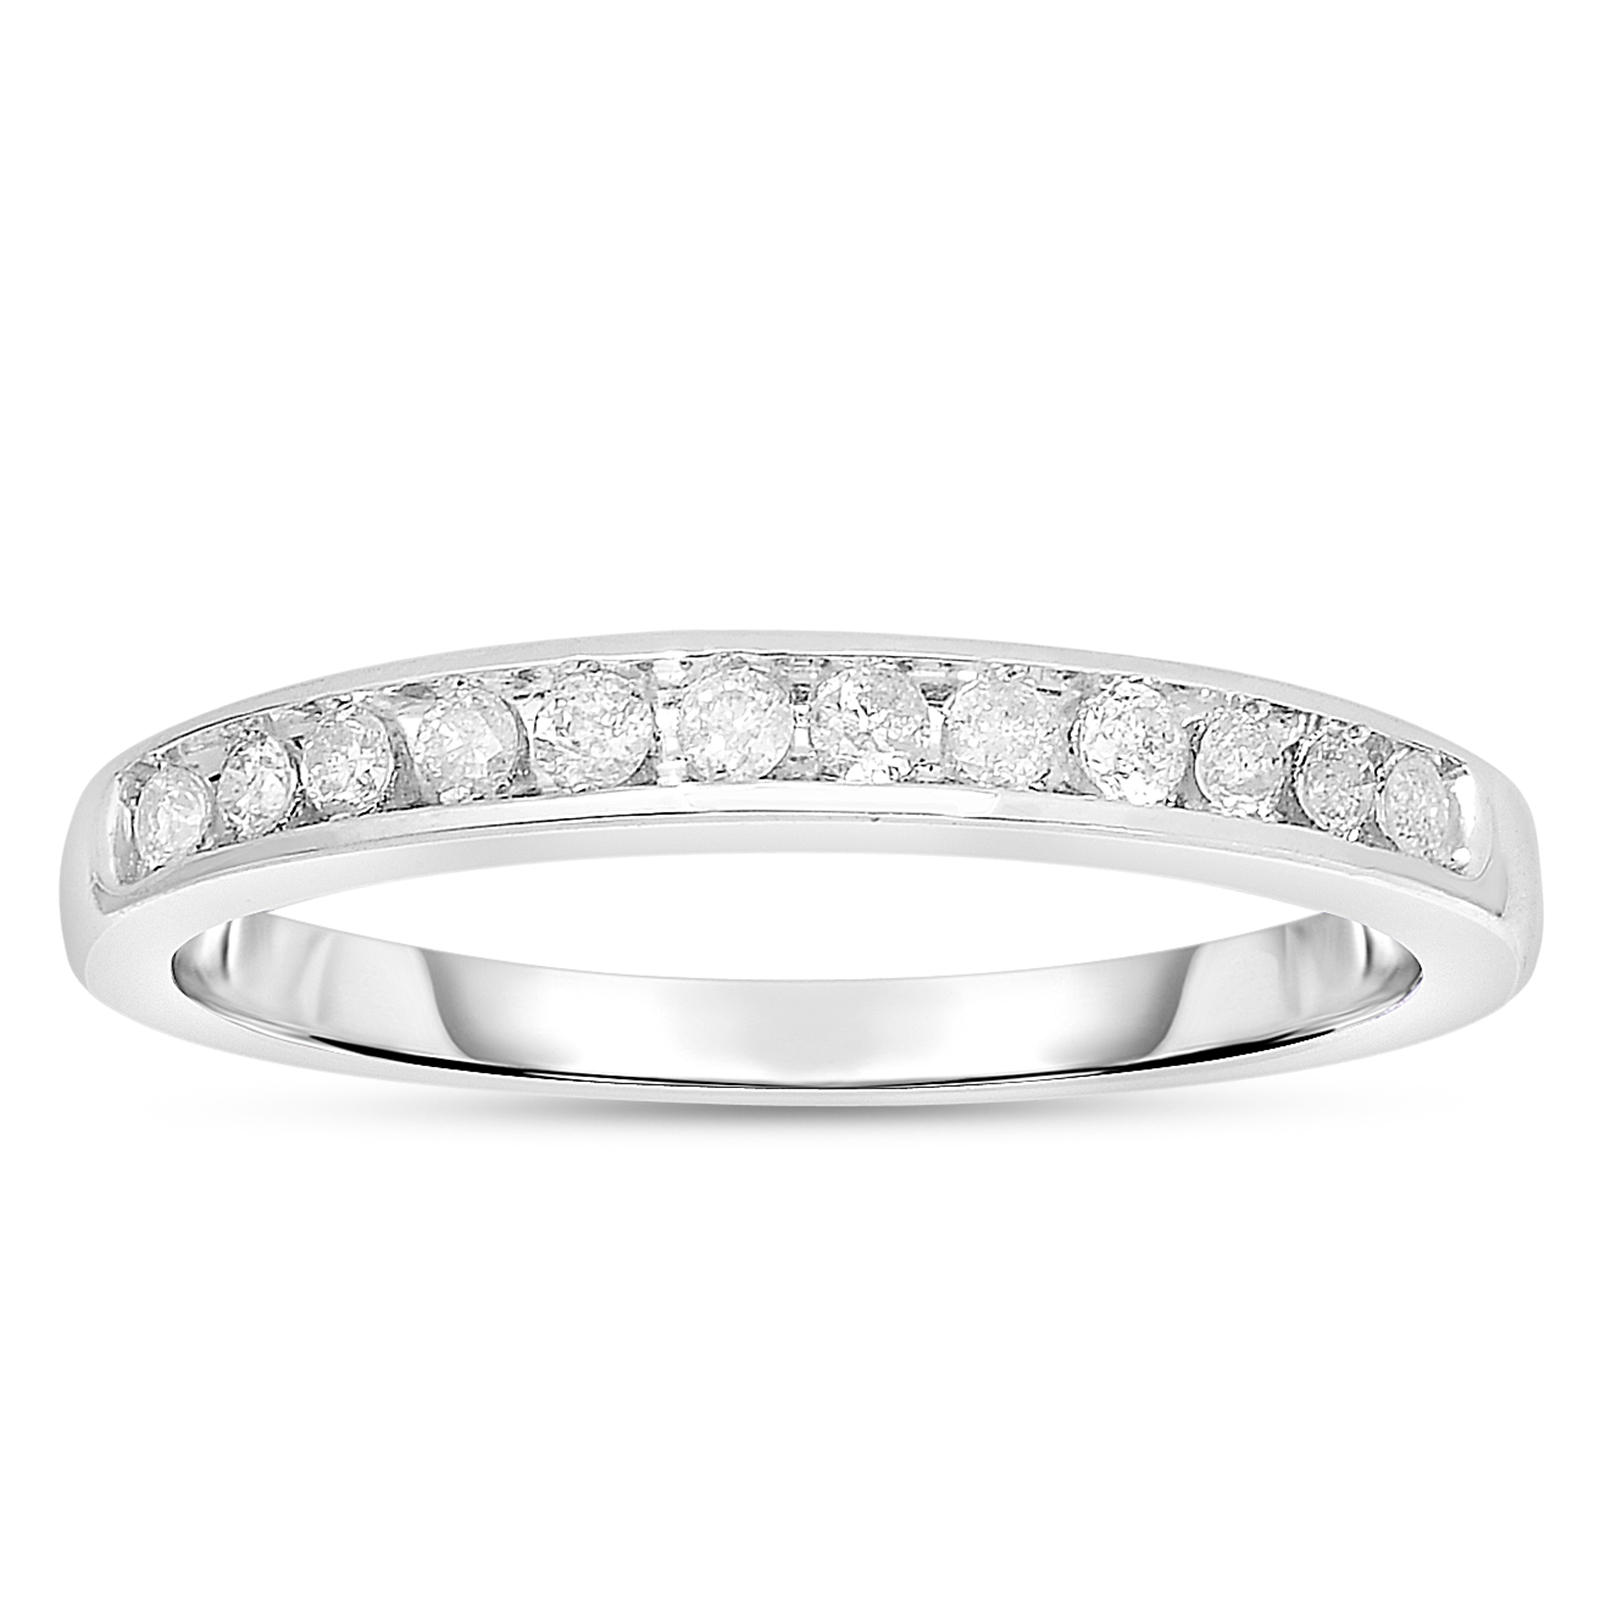 Linked In Love Platin&#233;e 1/5CTTW Diamond Bridal Wedding Band - Size 7 Only